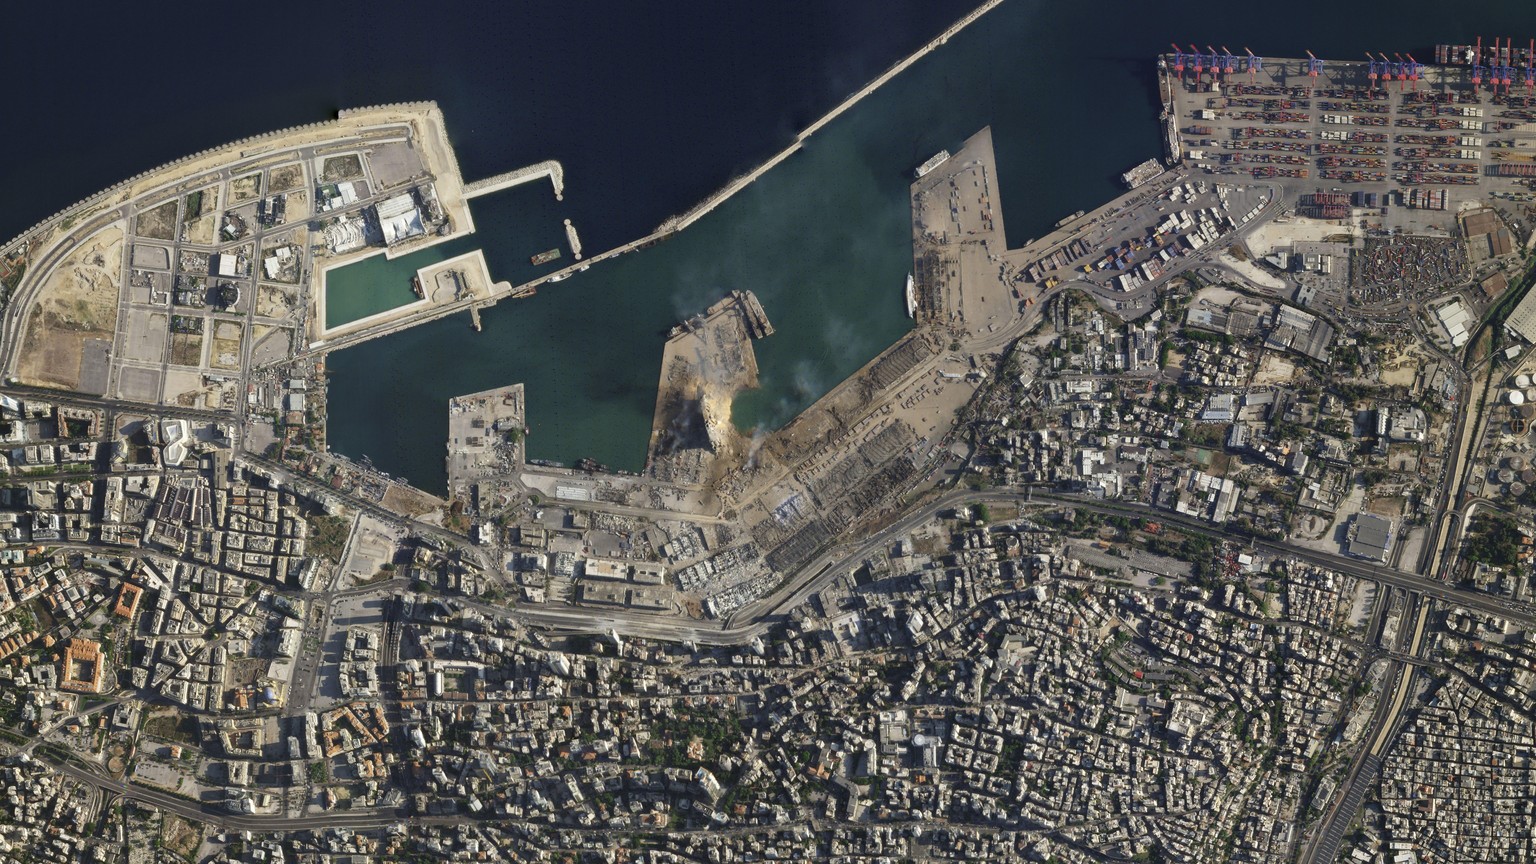 This satellite image taken on Wednesday Aug. 5, 2020 shows the port of Beirut and the surrounding area in Lebanon following a massive explosion on Tuesday. Residents of Beirut confronted a scene of ut ...